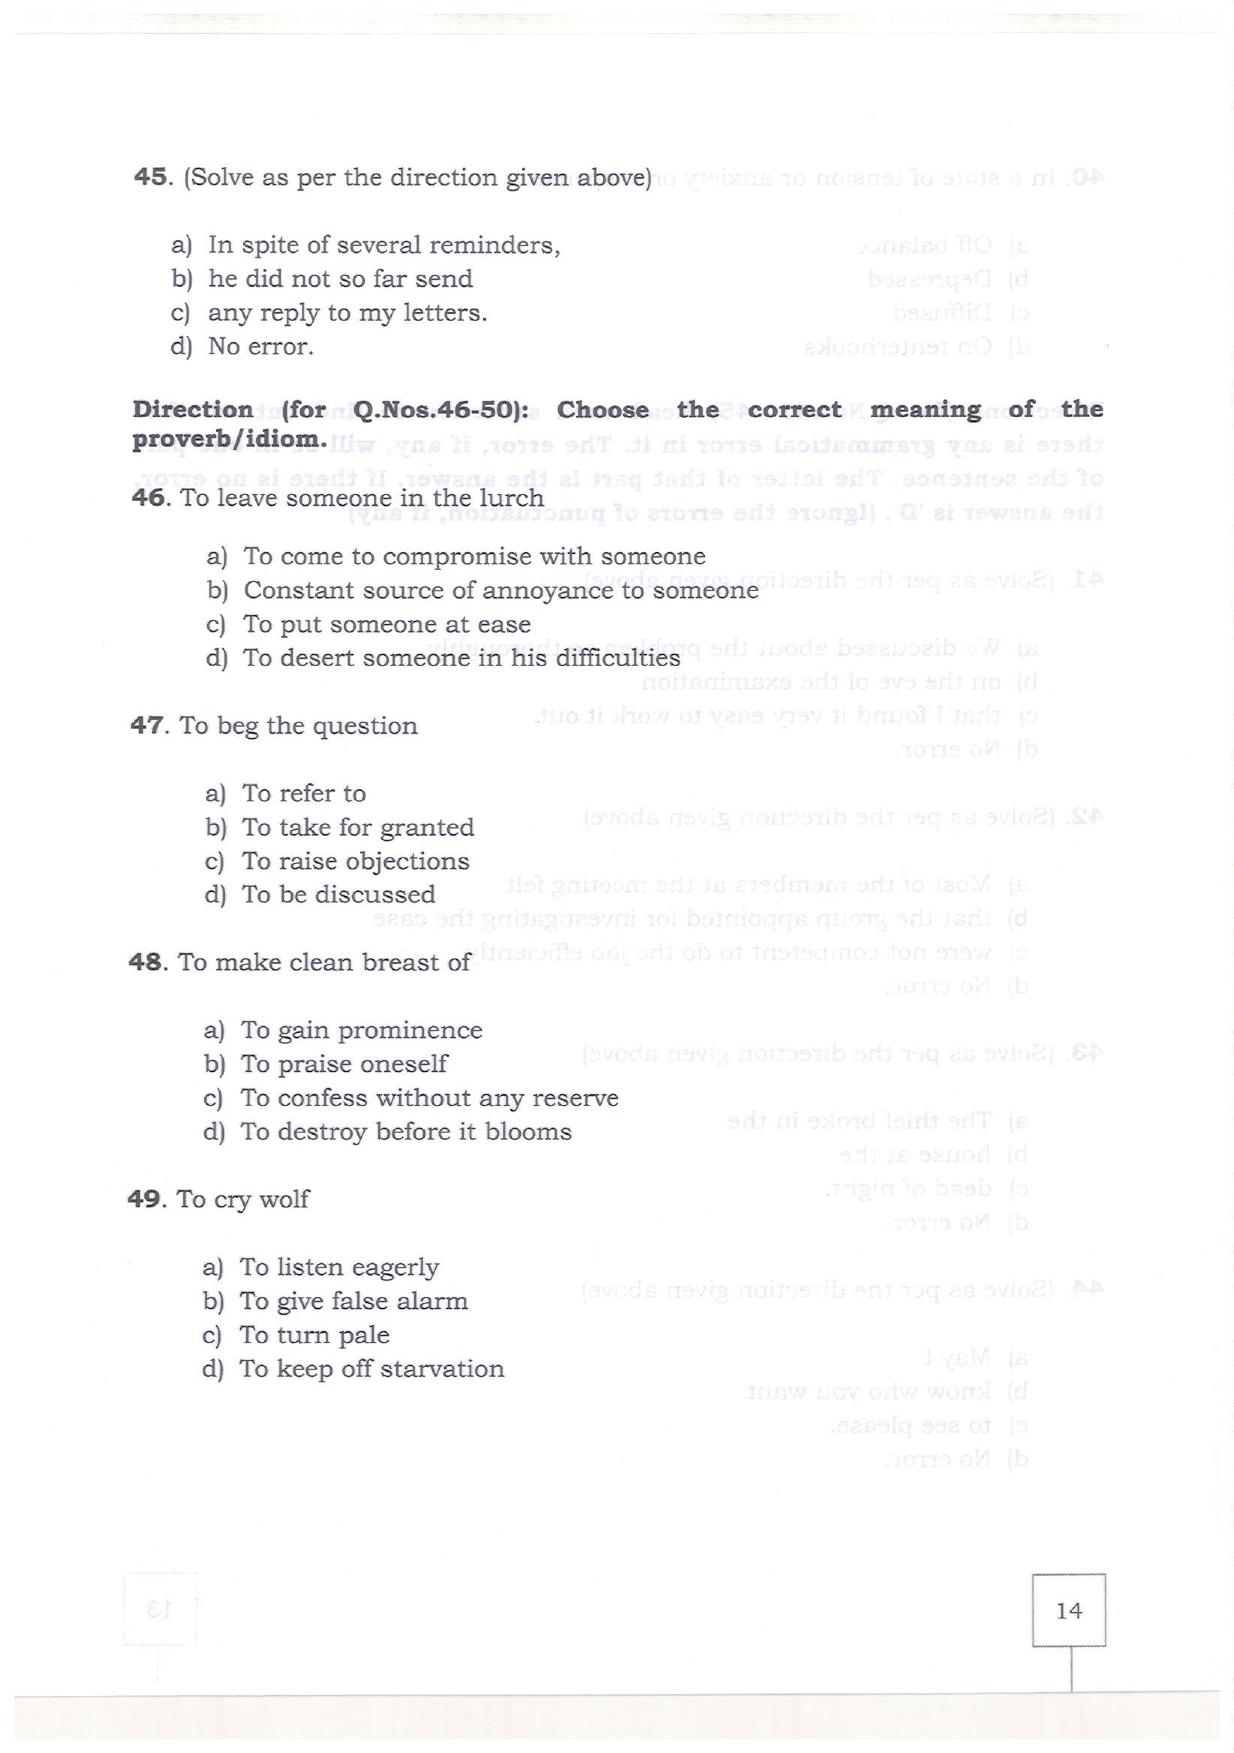 KMAT Question Papers - February 2019 - Page 12